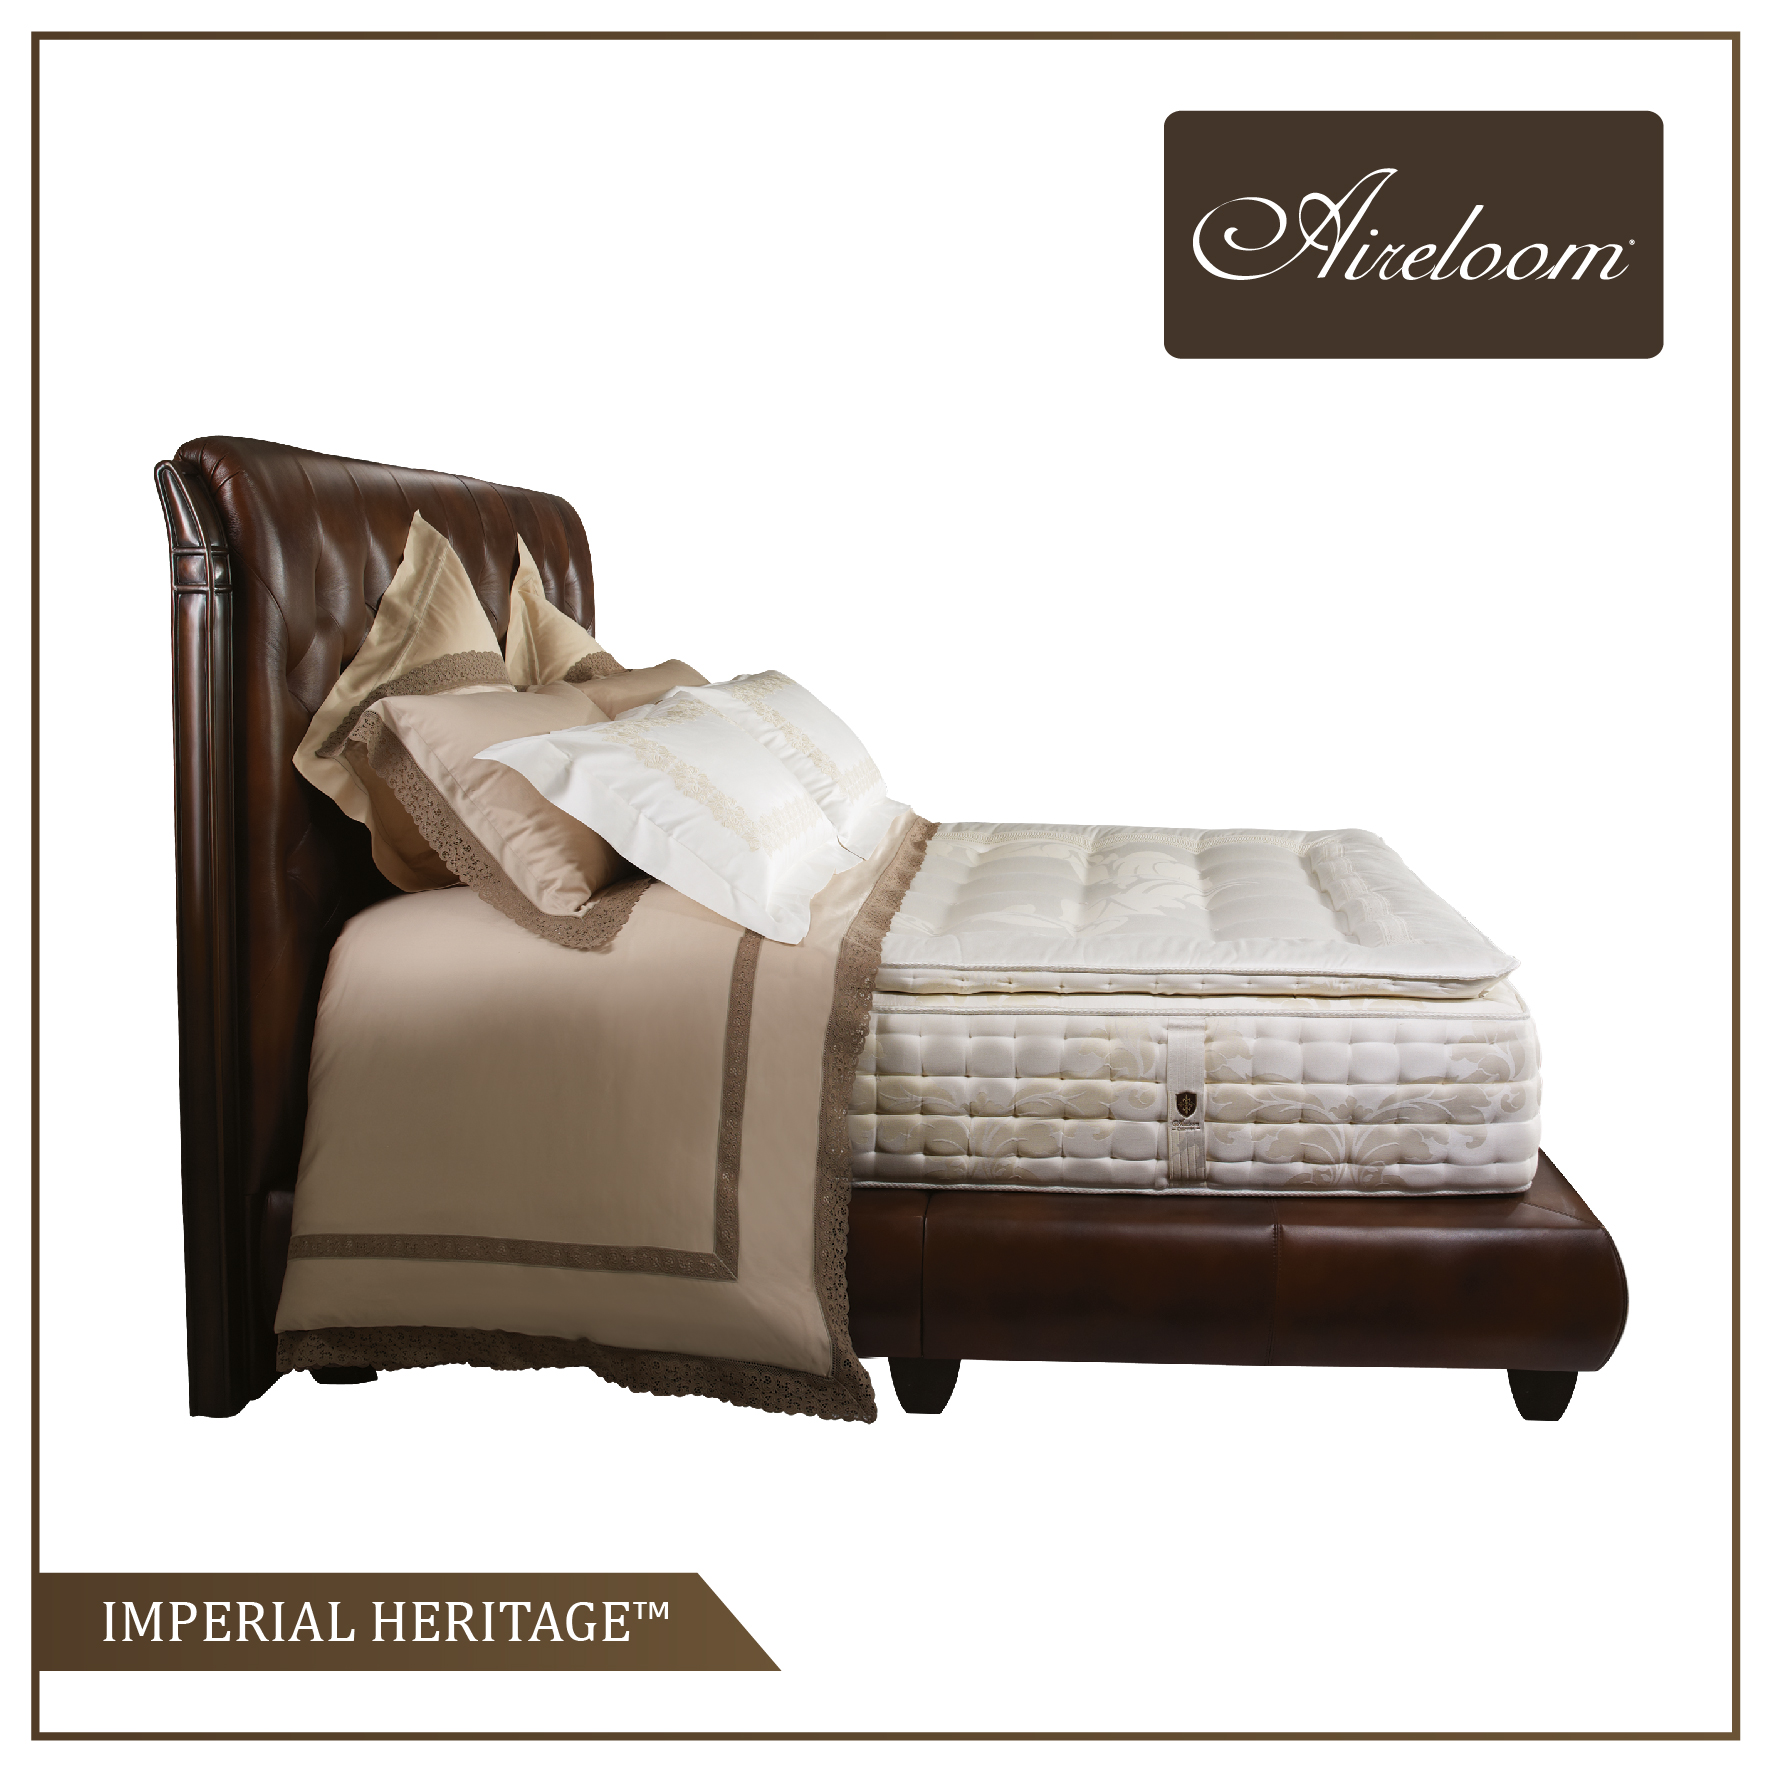 Aireloom Spring Bed Imperial Heritage - Mattress Only